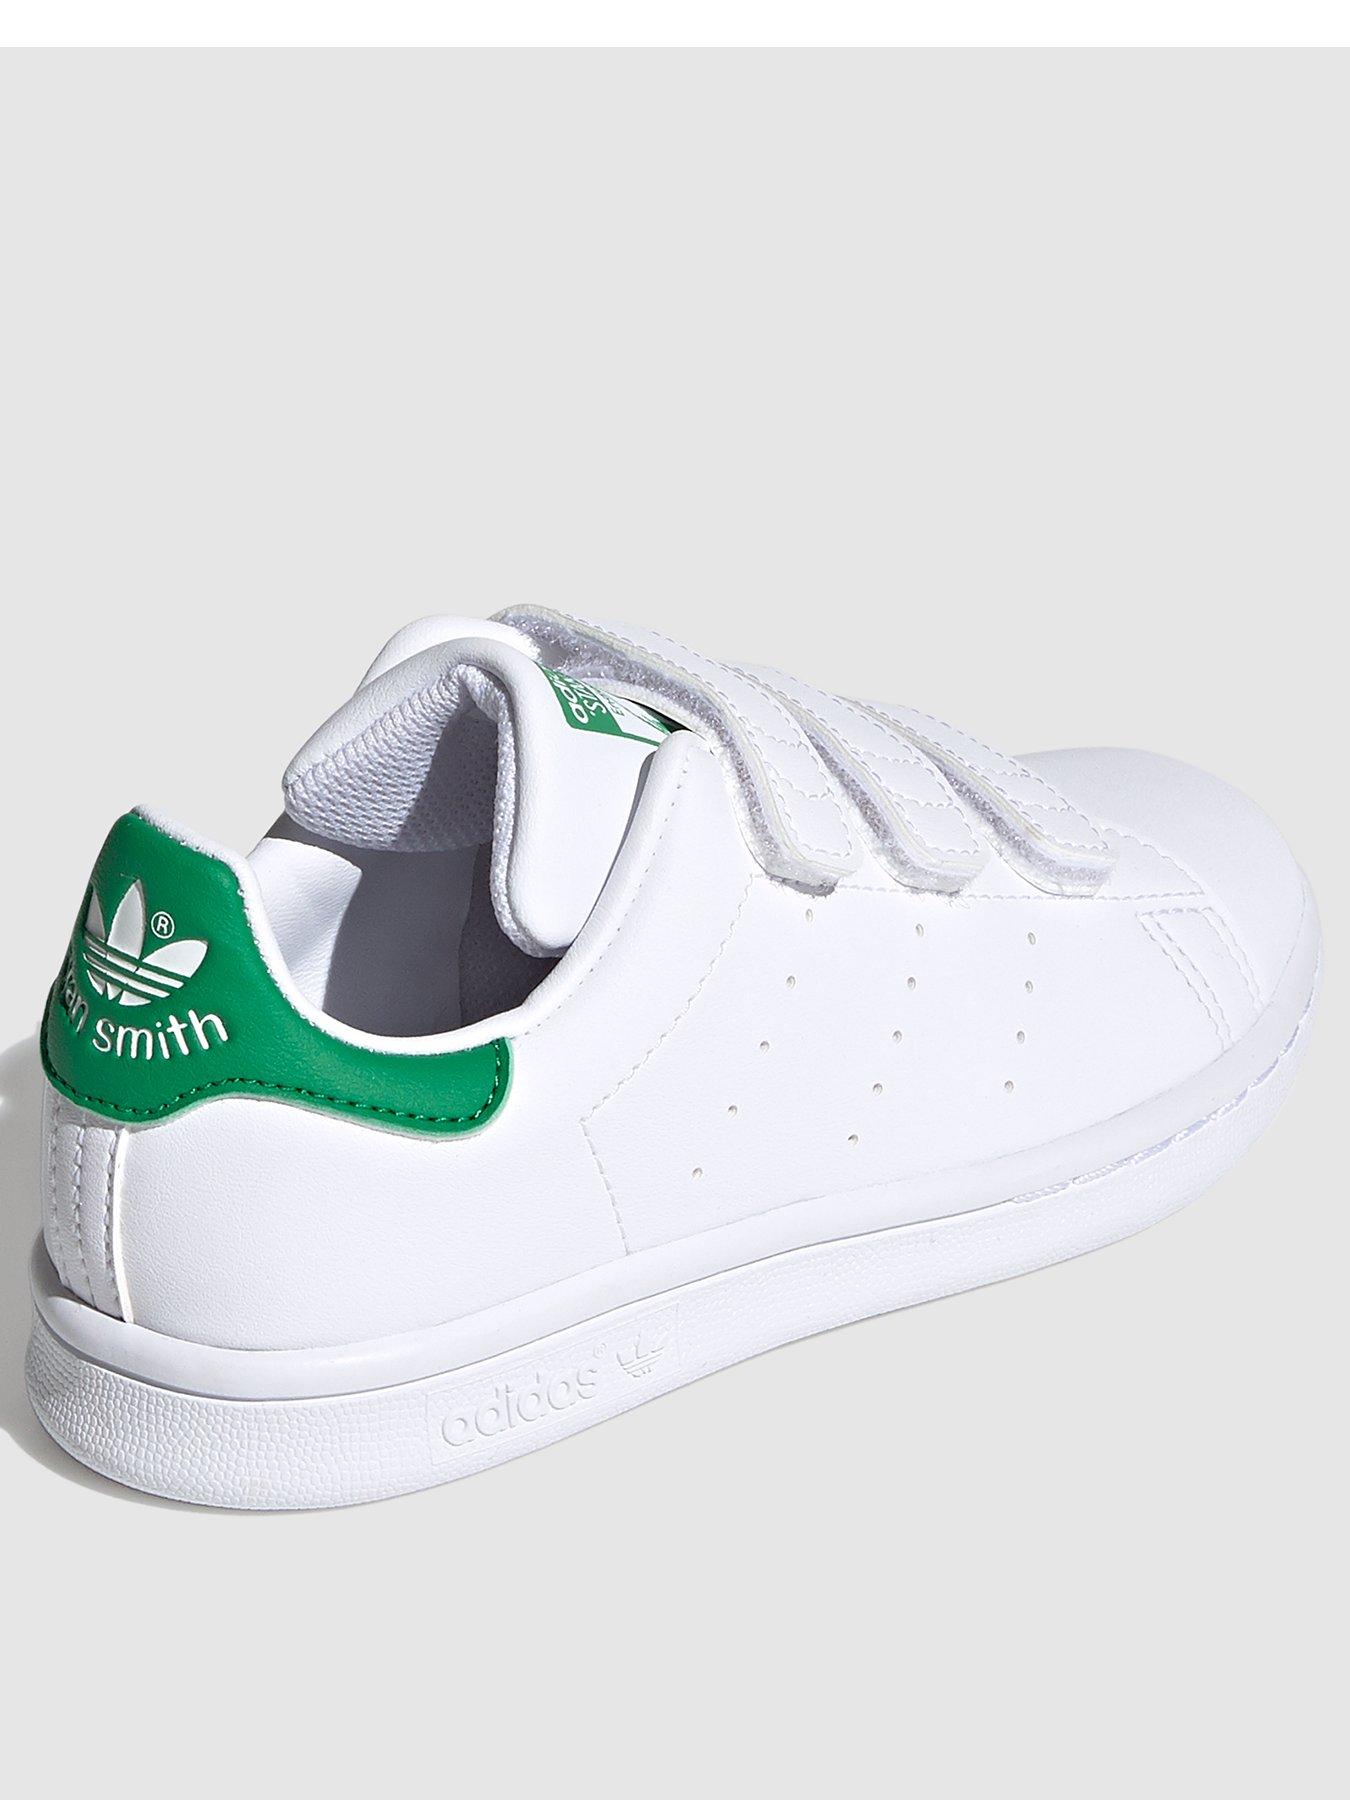 adidas Originals Stan Smith Childrens Trainers - White/Green | very.co.uk